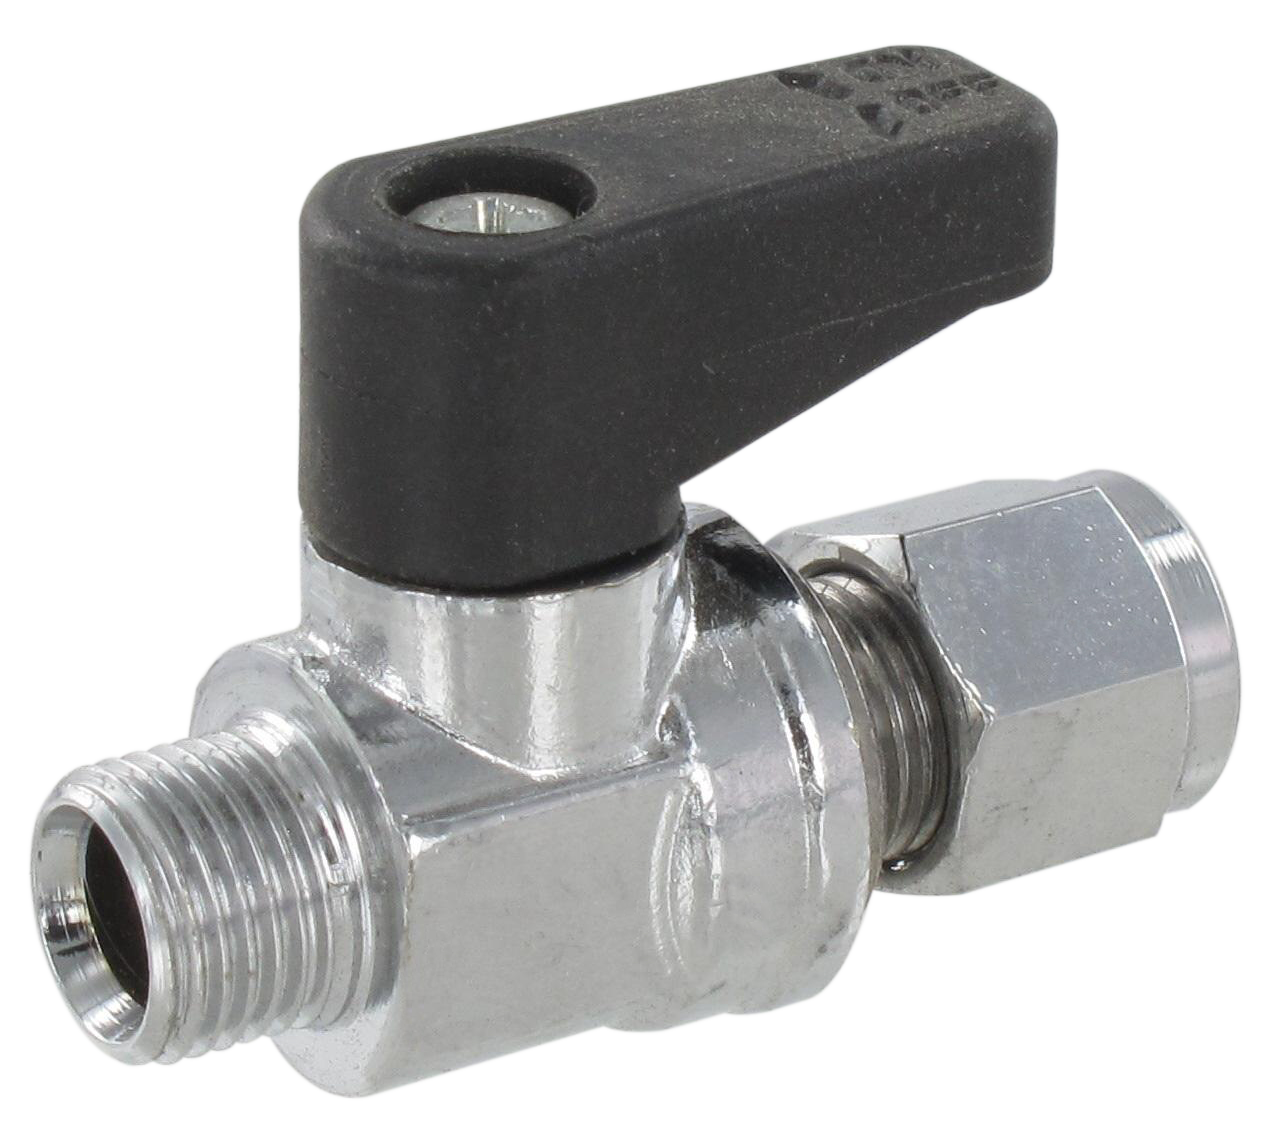 BSP threaded ball valves with universal compression fittings Nickel-plated brass ball valves